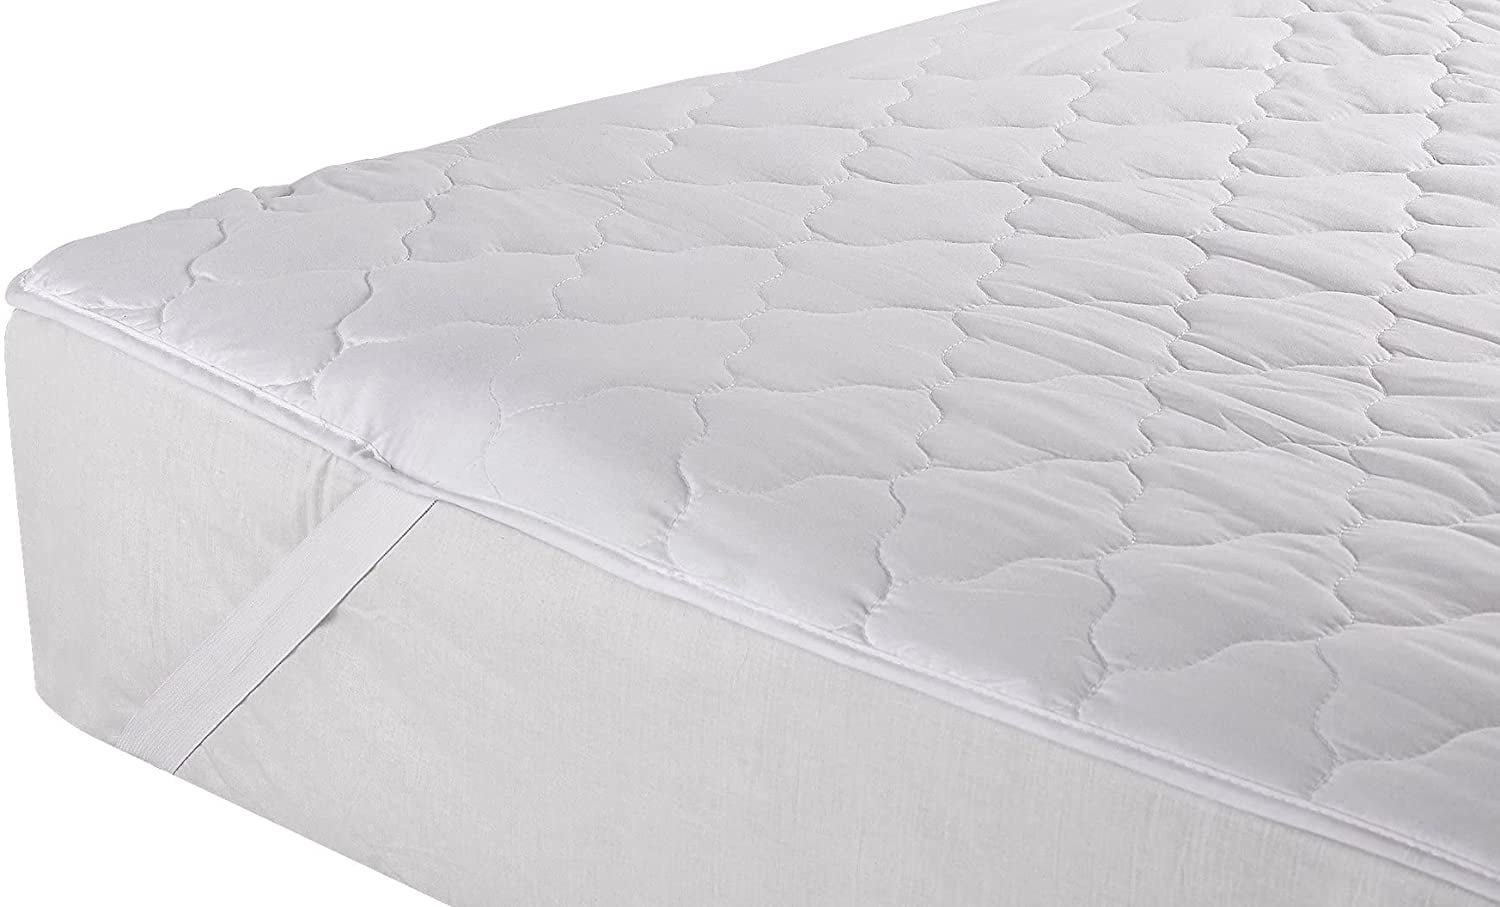 Cabin Comfort 1.5 Memory Foam Egg Crate Twin or Cot Camp Mattress Pad | Cot Size 26 x 70 Inches